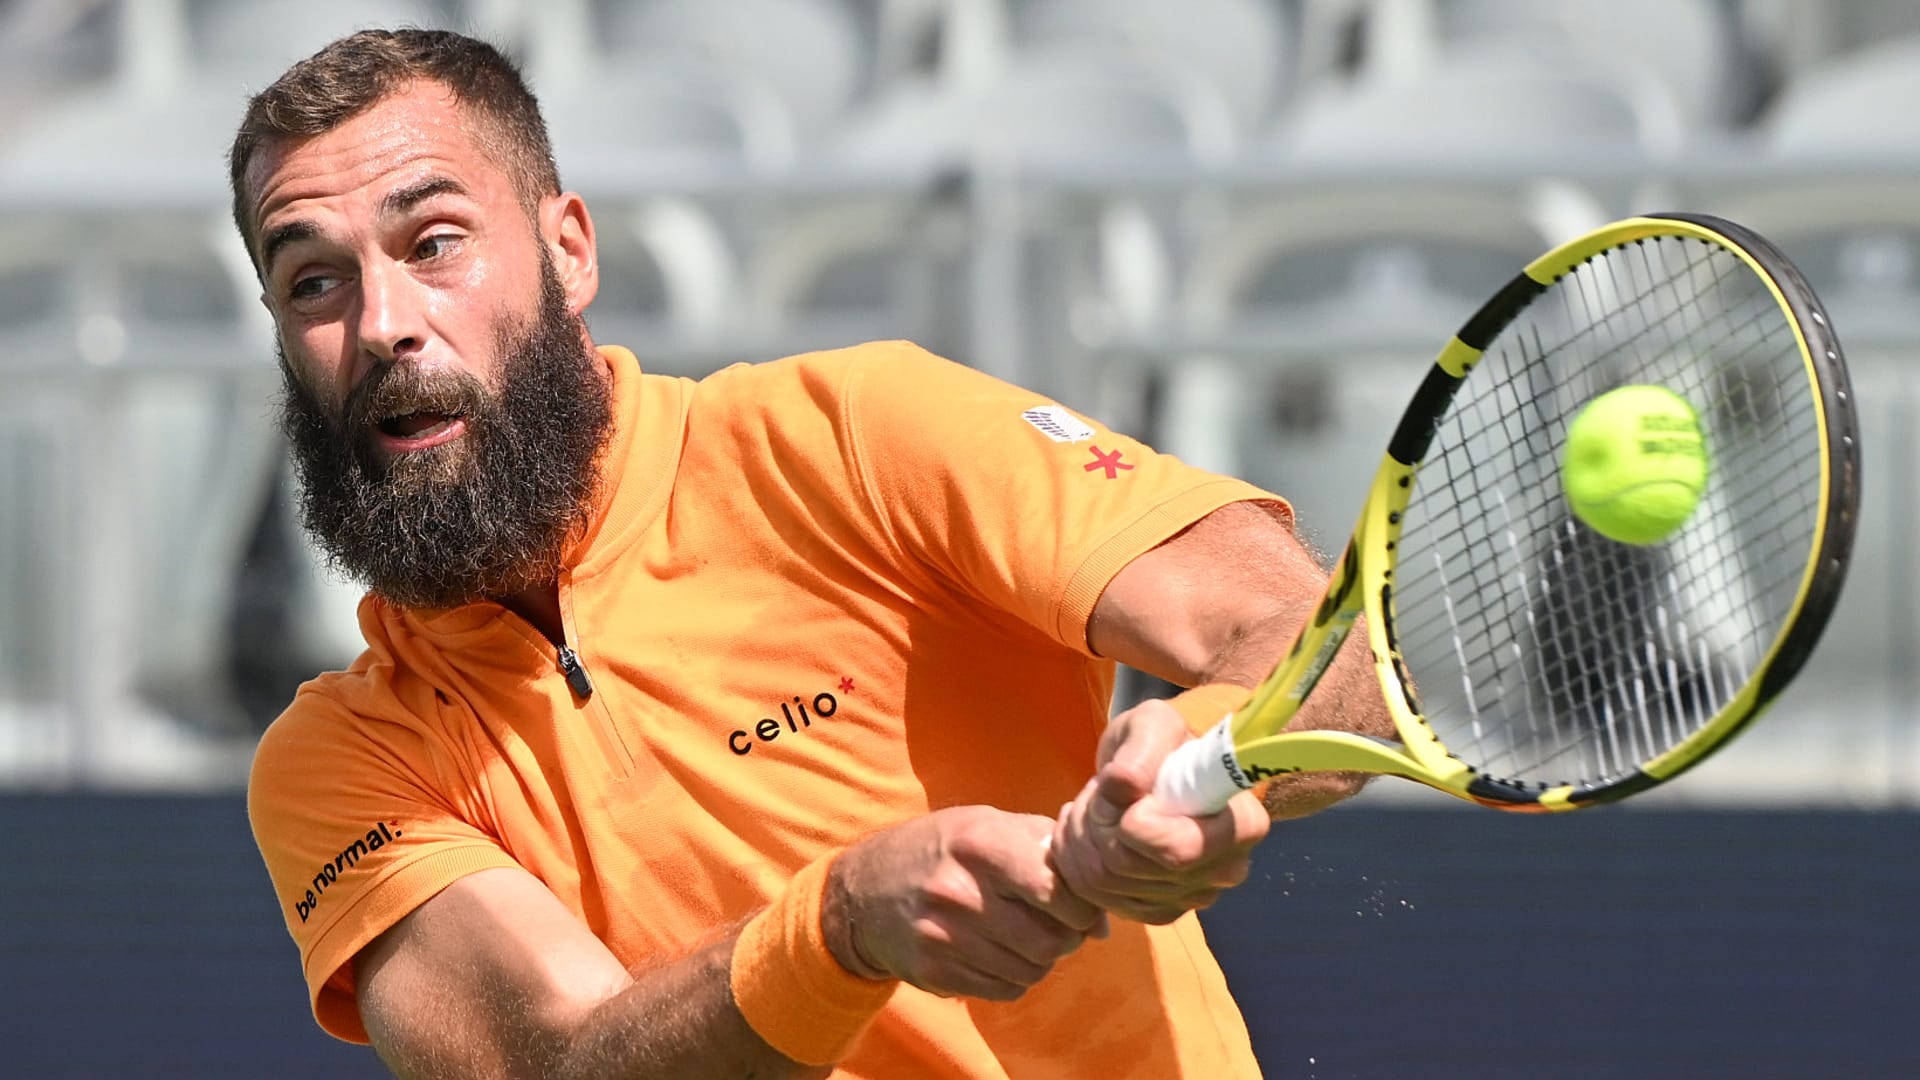 Professional Tennis Player Benoit Paire in Action. Wallpaper